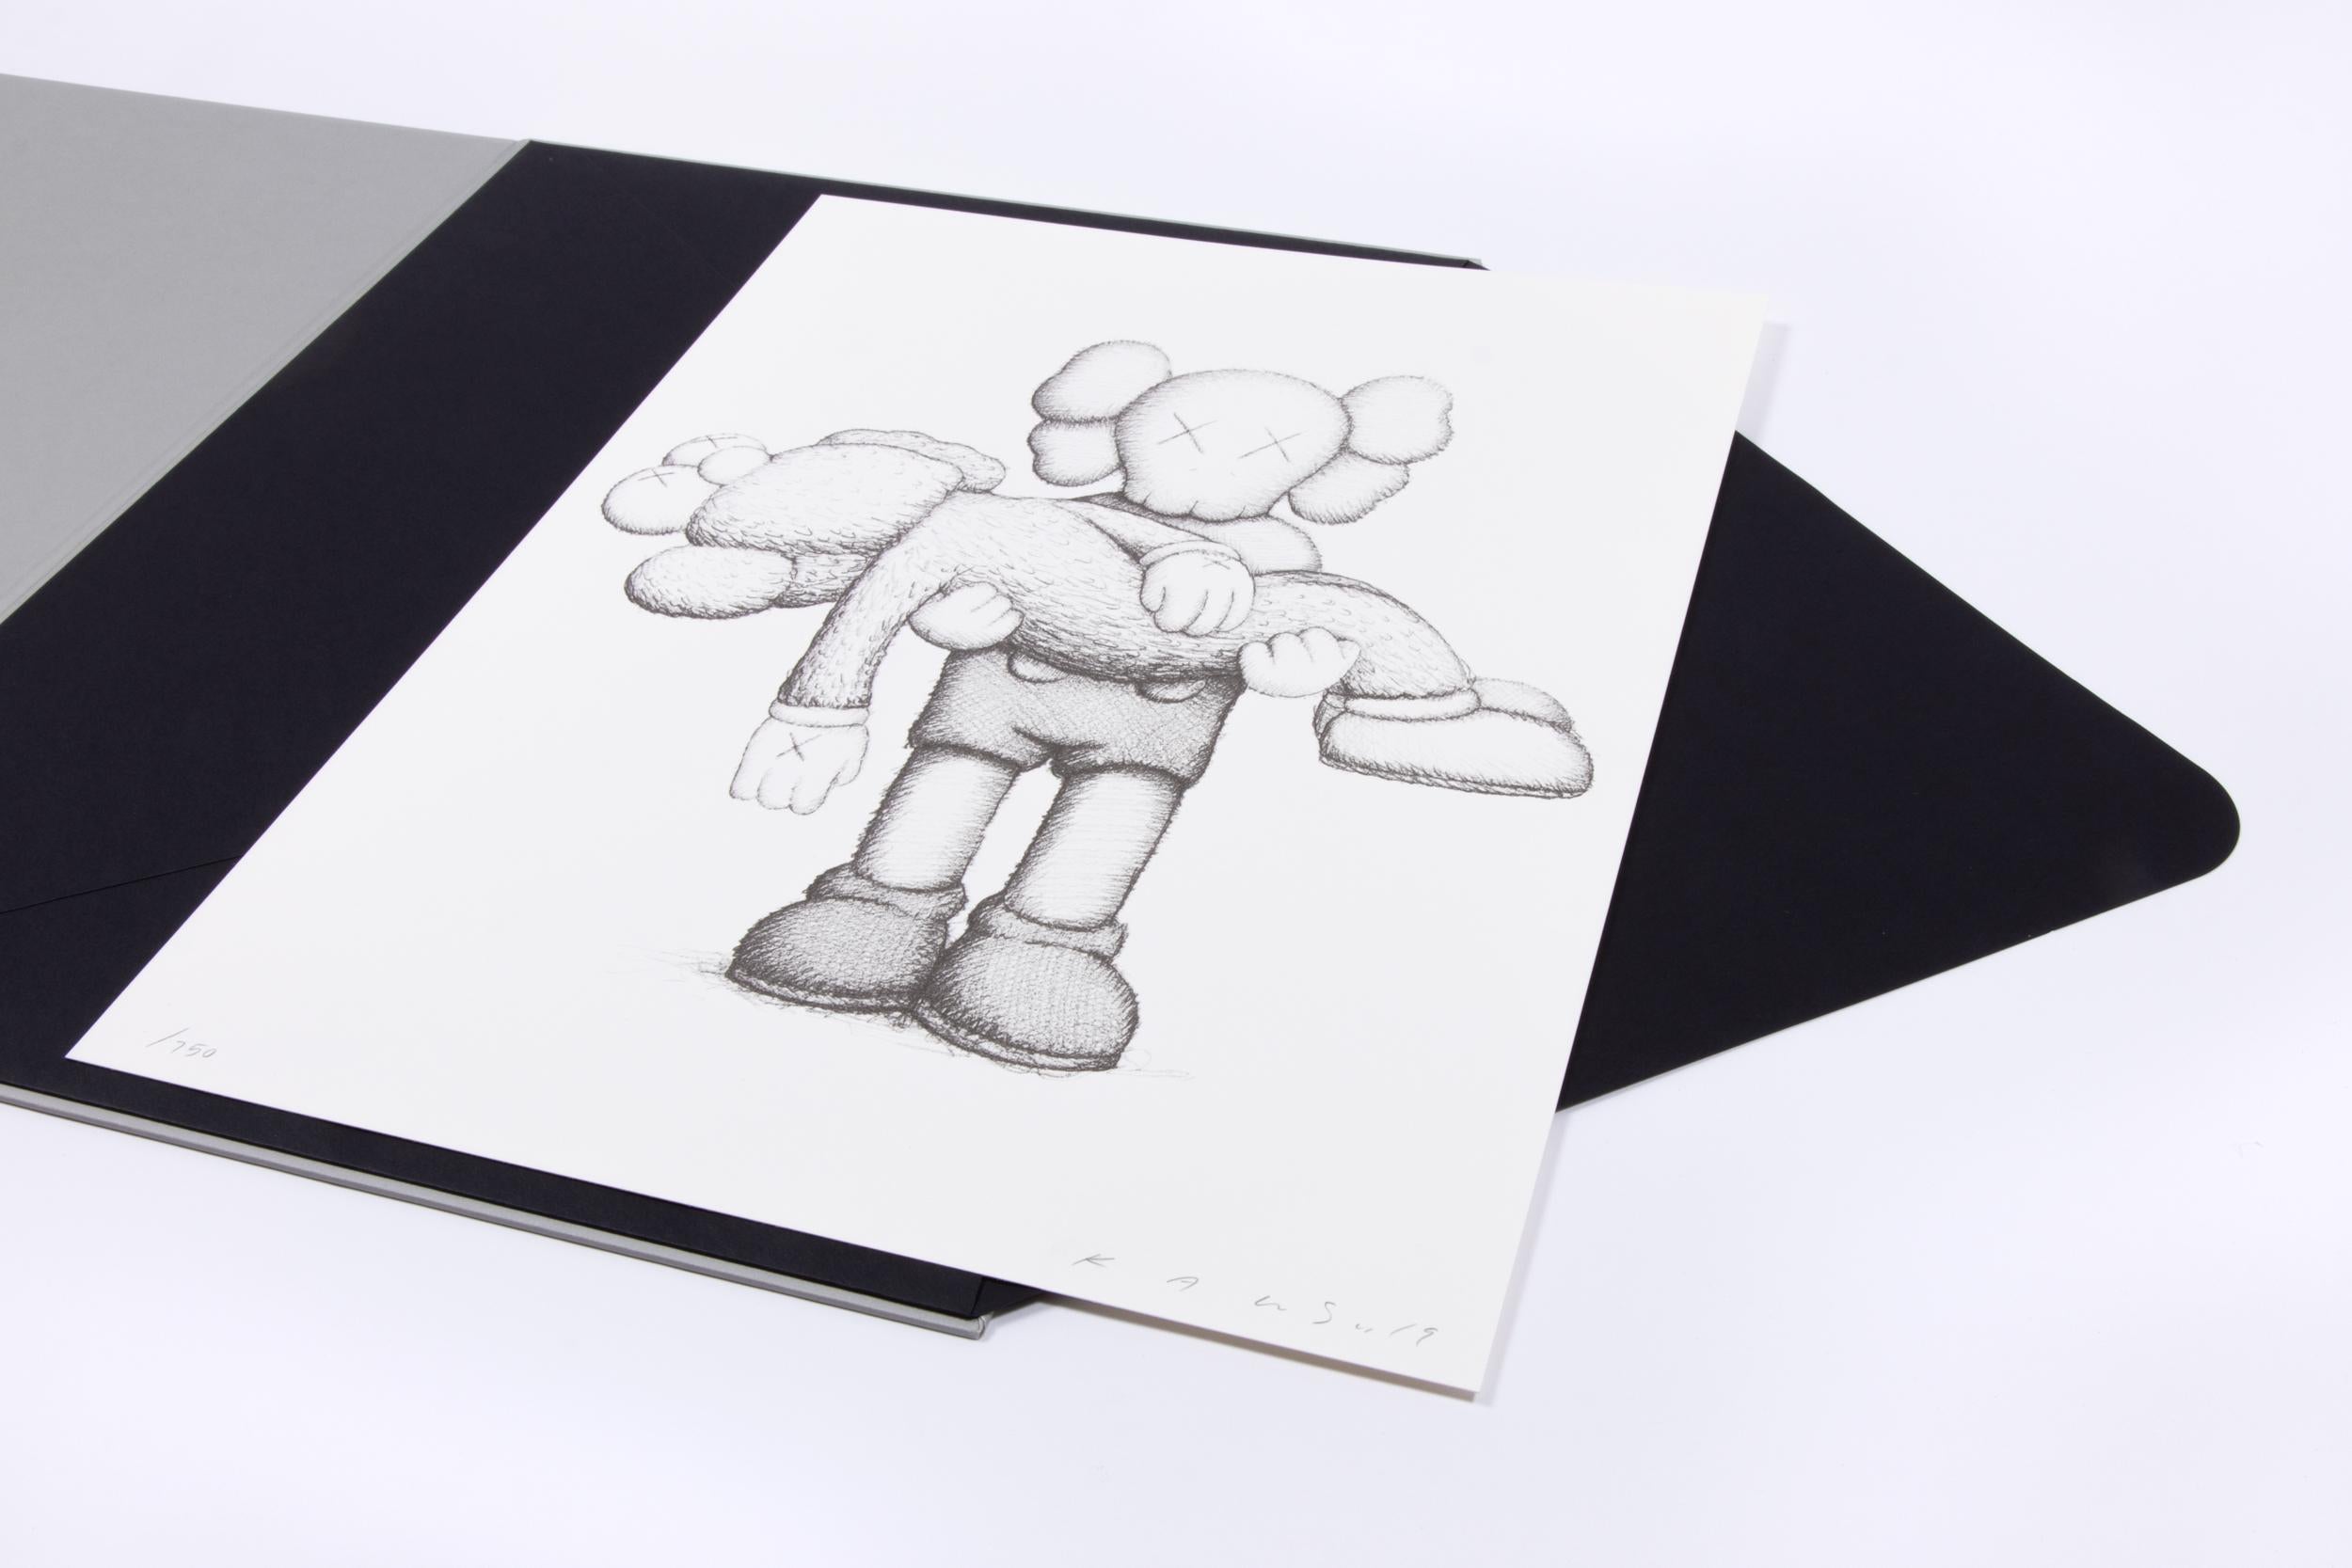 KAWS, Gone - Screenprint incl. Limited Edition Catalogue, Signed Print 1